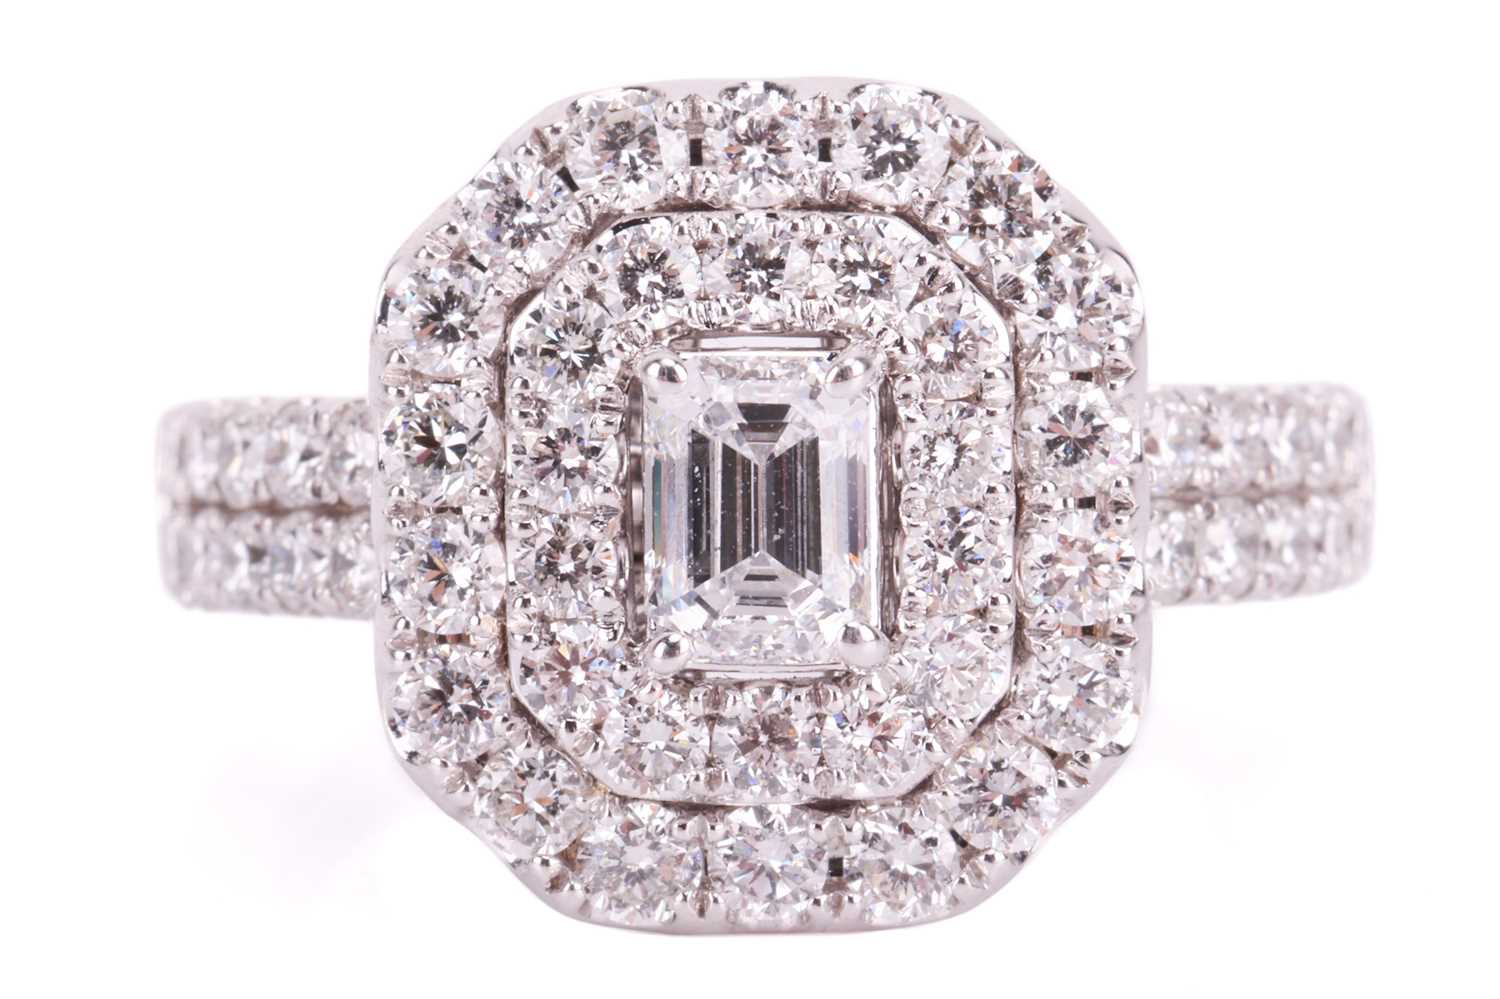 A laboratory-grown diamond cluster ring, featuring an emerald-cut laboratory-grown diamond measuring